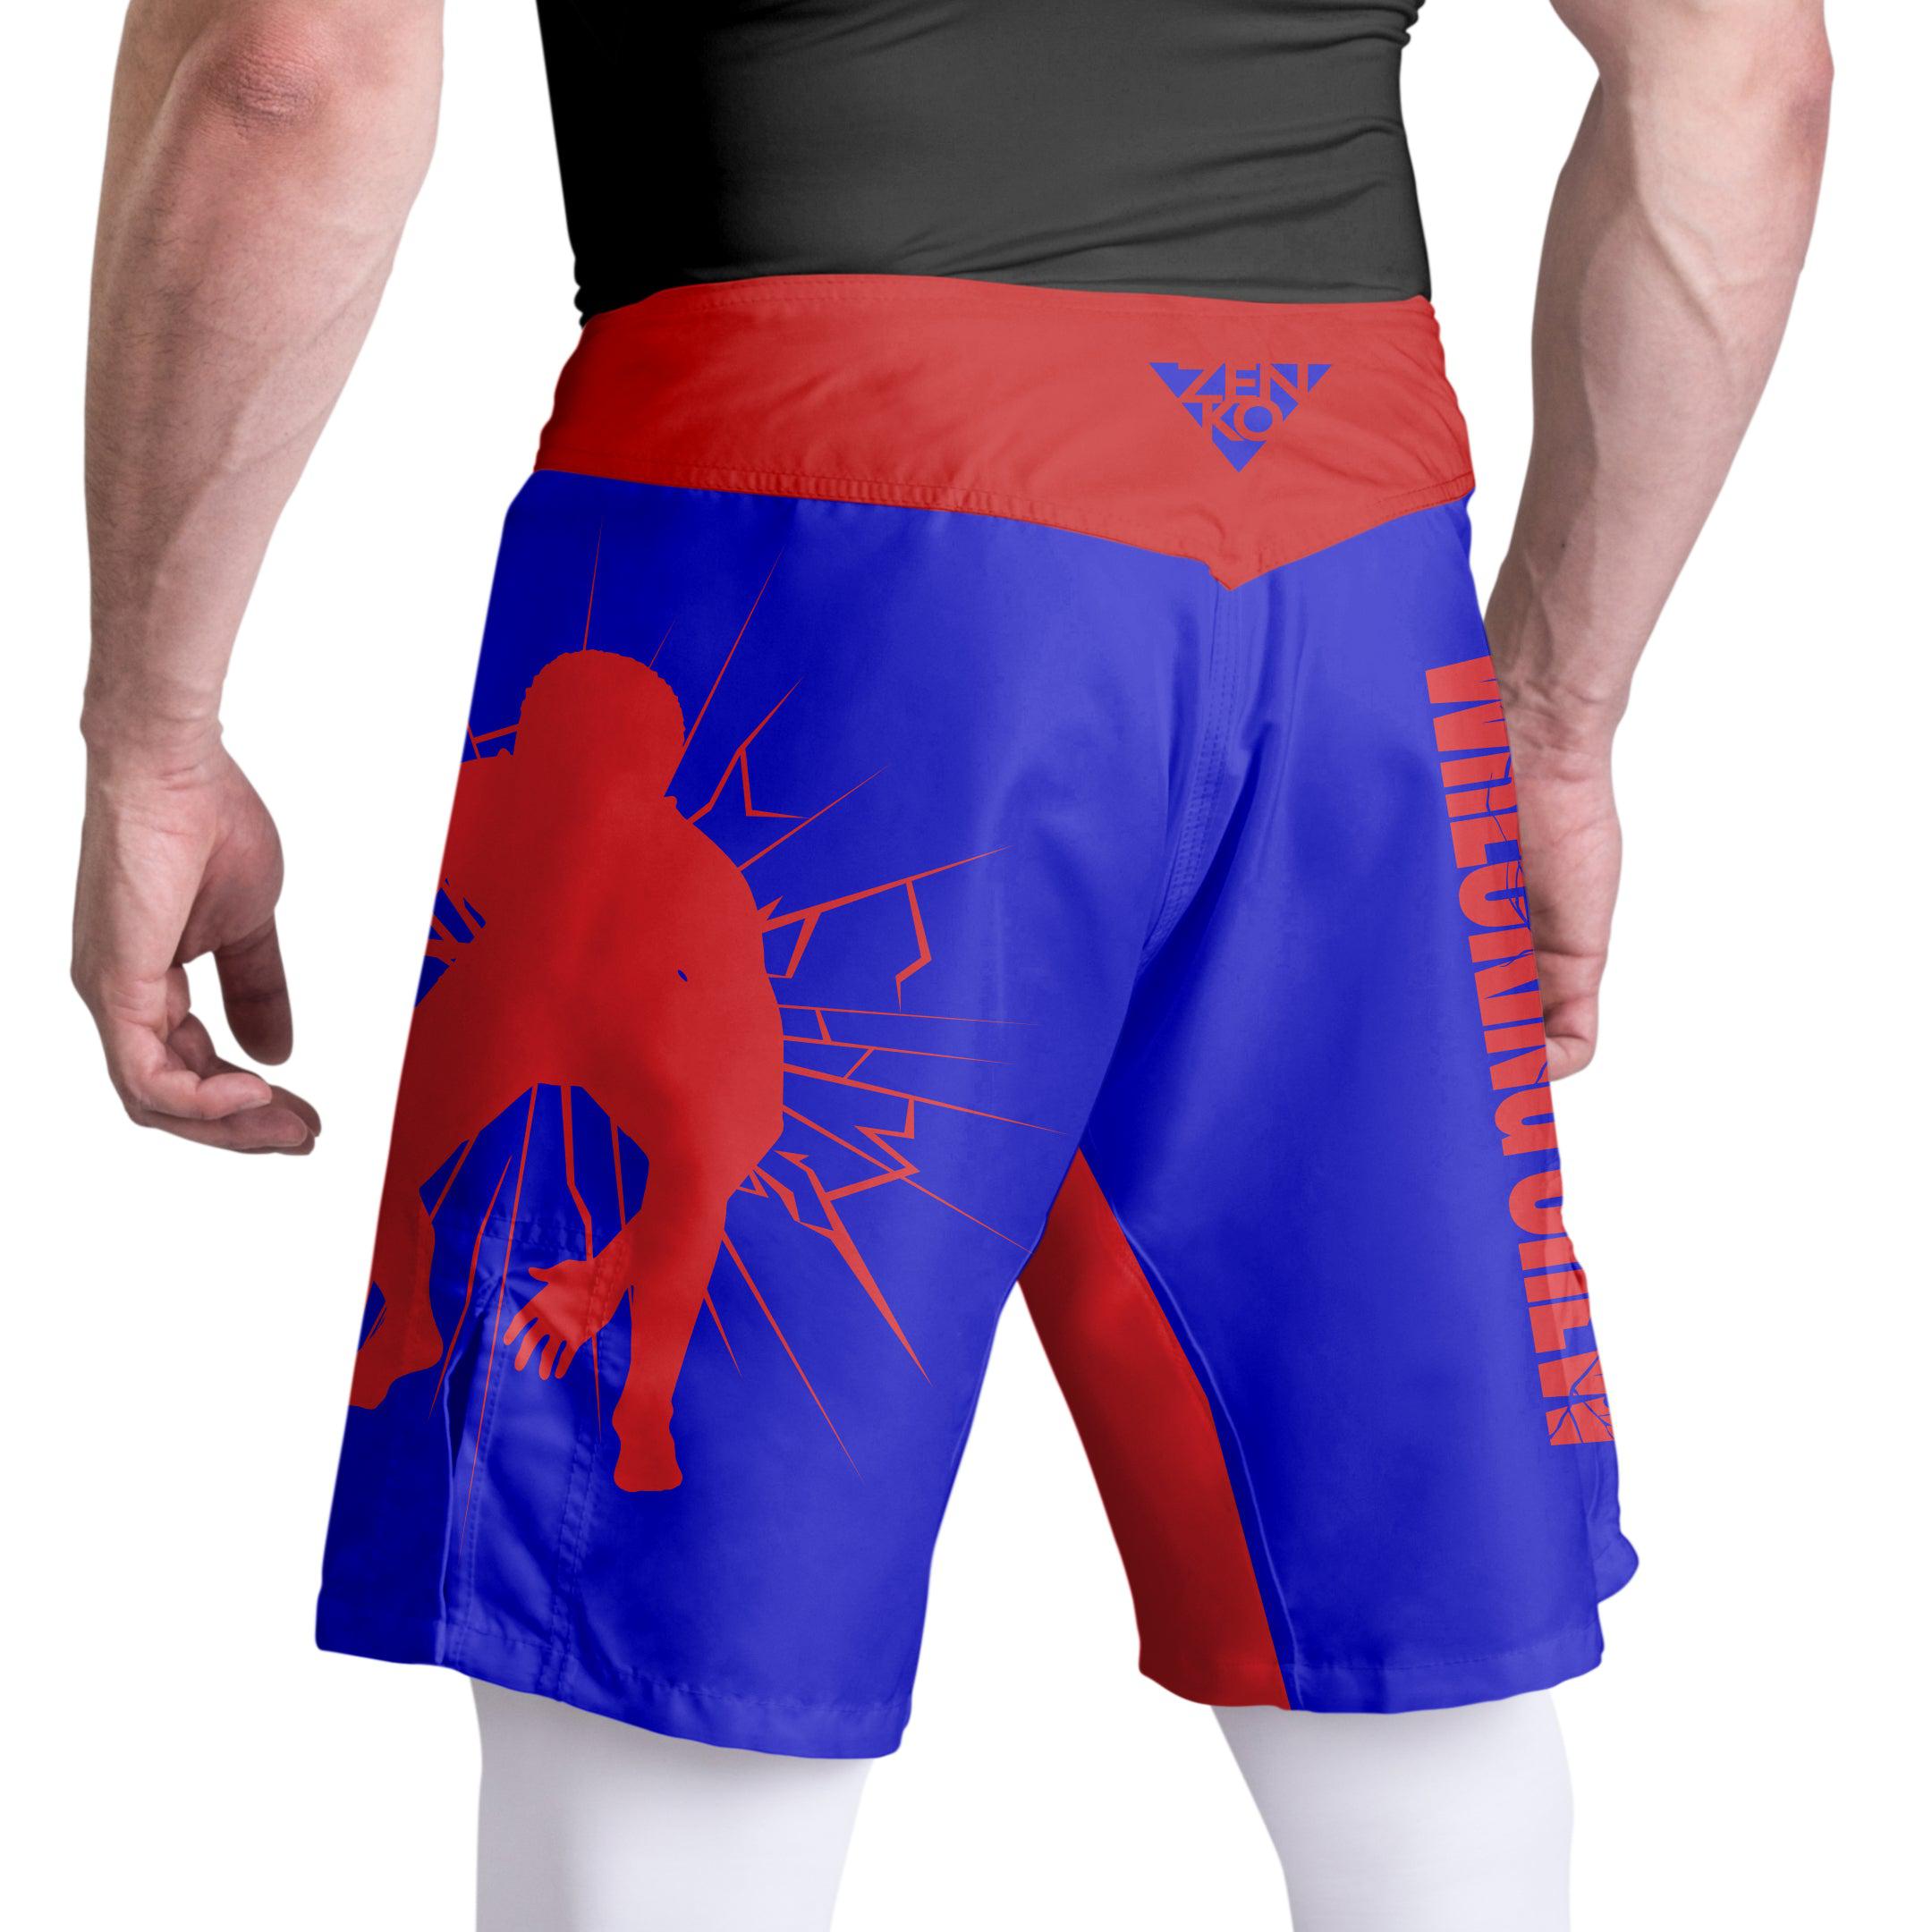 Wrecking Crew Fight Shorts